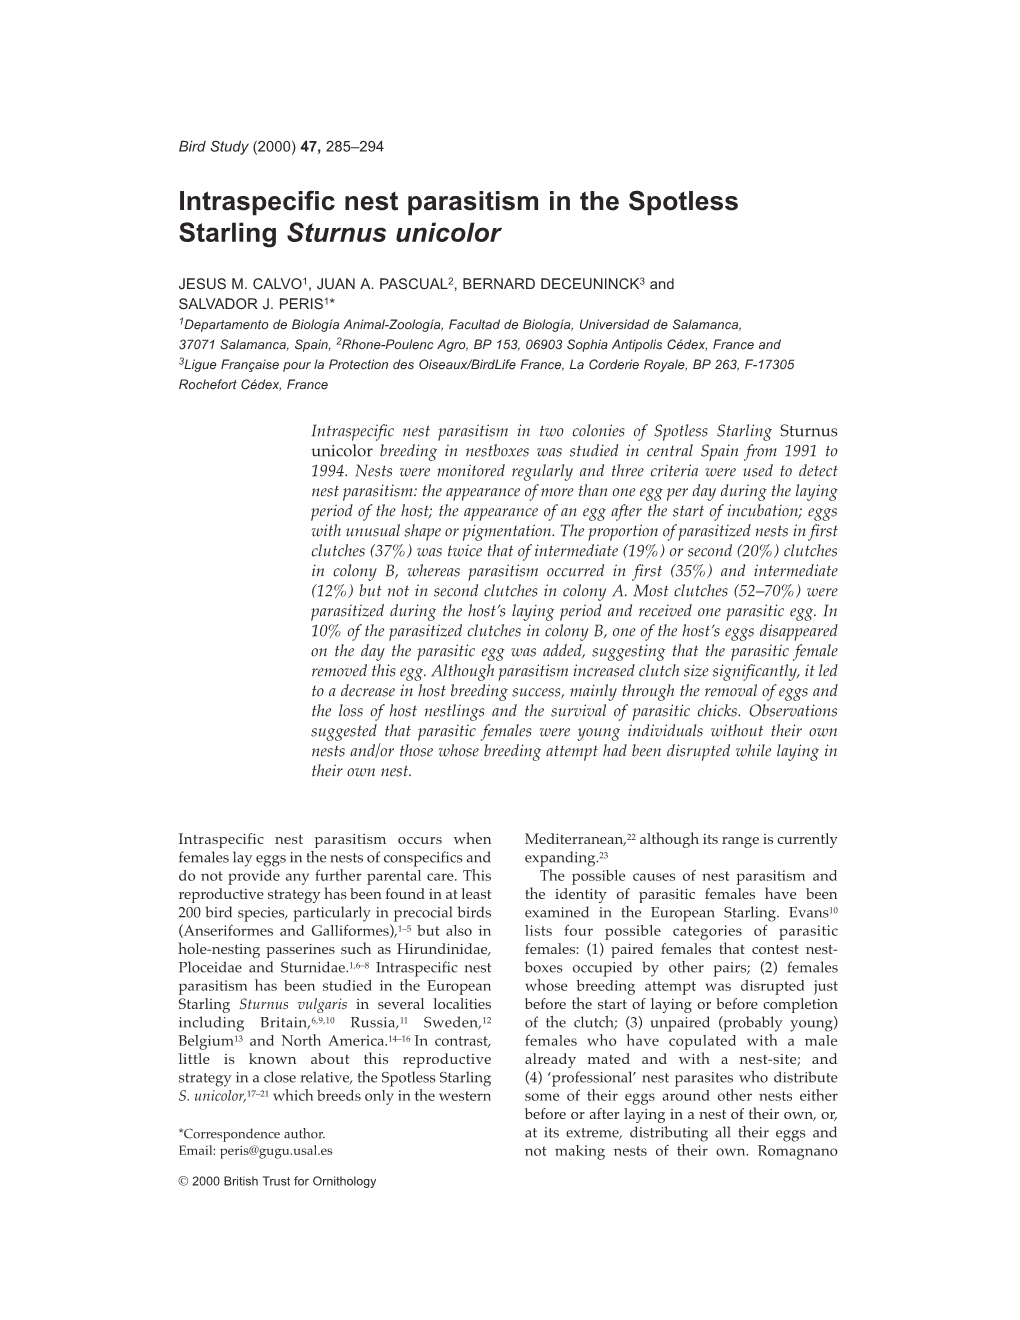 Intraspecific Nest Parasitism in the Spotless Starling Sturnus Unicolor